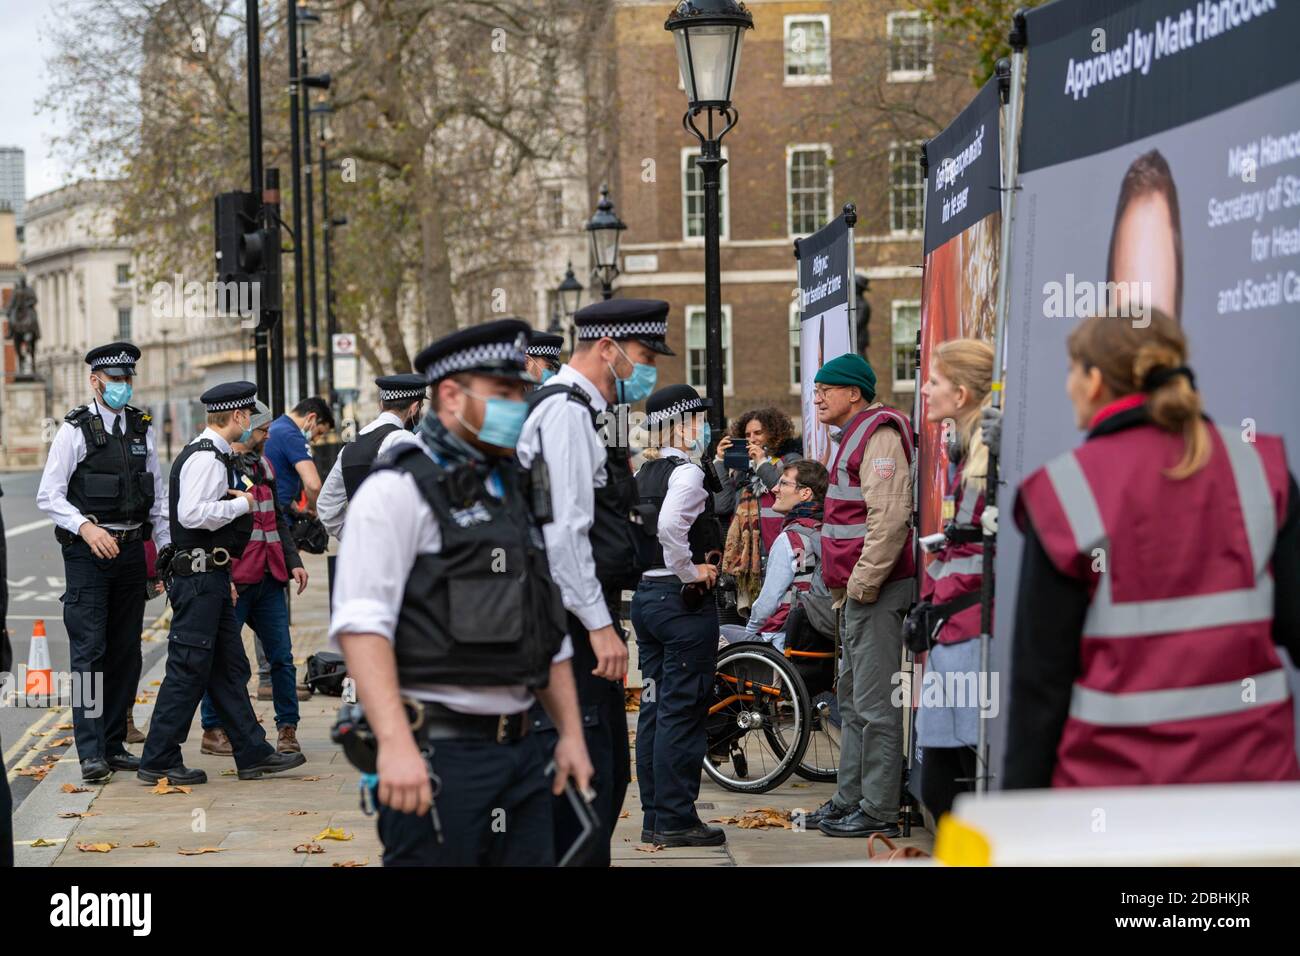 London, UK. 17th Nov, 2020. (Warning, some graphic images) Police move in to close down an anti abortion protest by the Centre for bio-ethical reform, UK, opposite Downing Street, London UK Credit: Ian Davidson/Alamy Live News Stock Photo